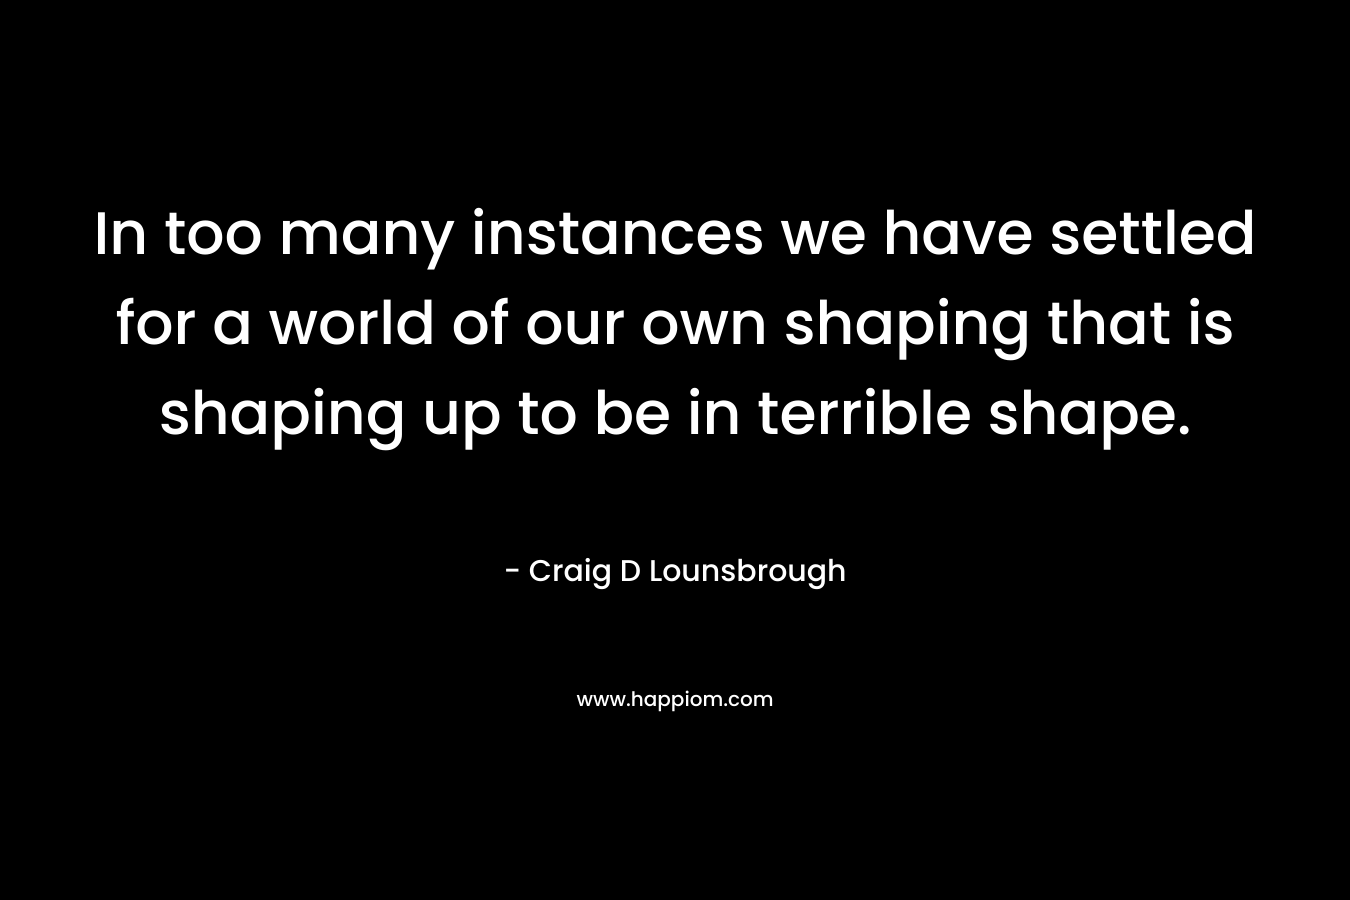 In too many instances we have settled for a world of our own shaping that is shaping up to be in terrible shape.